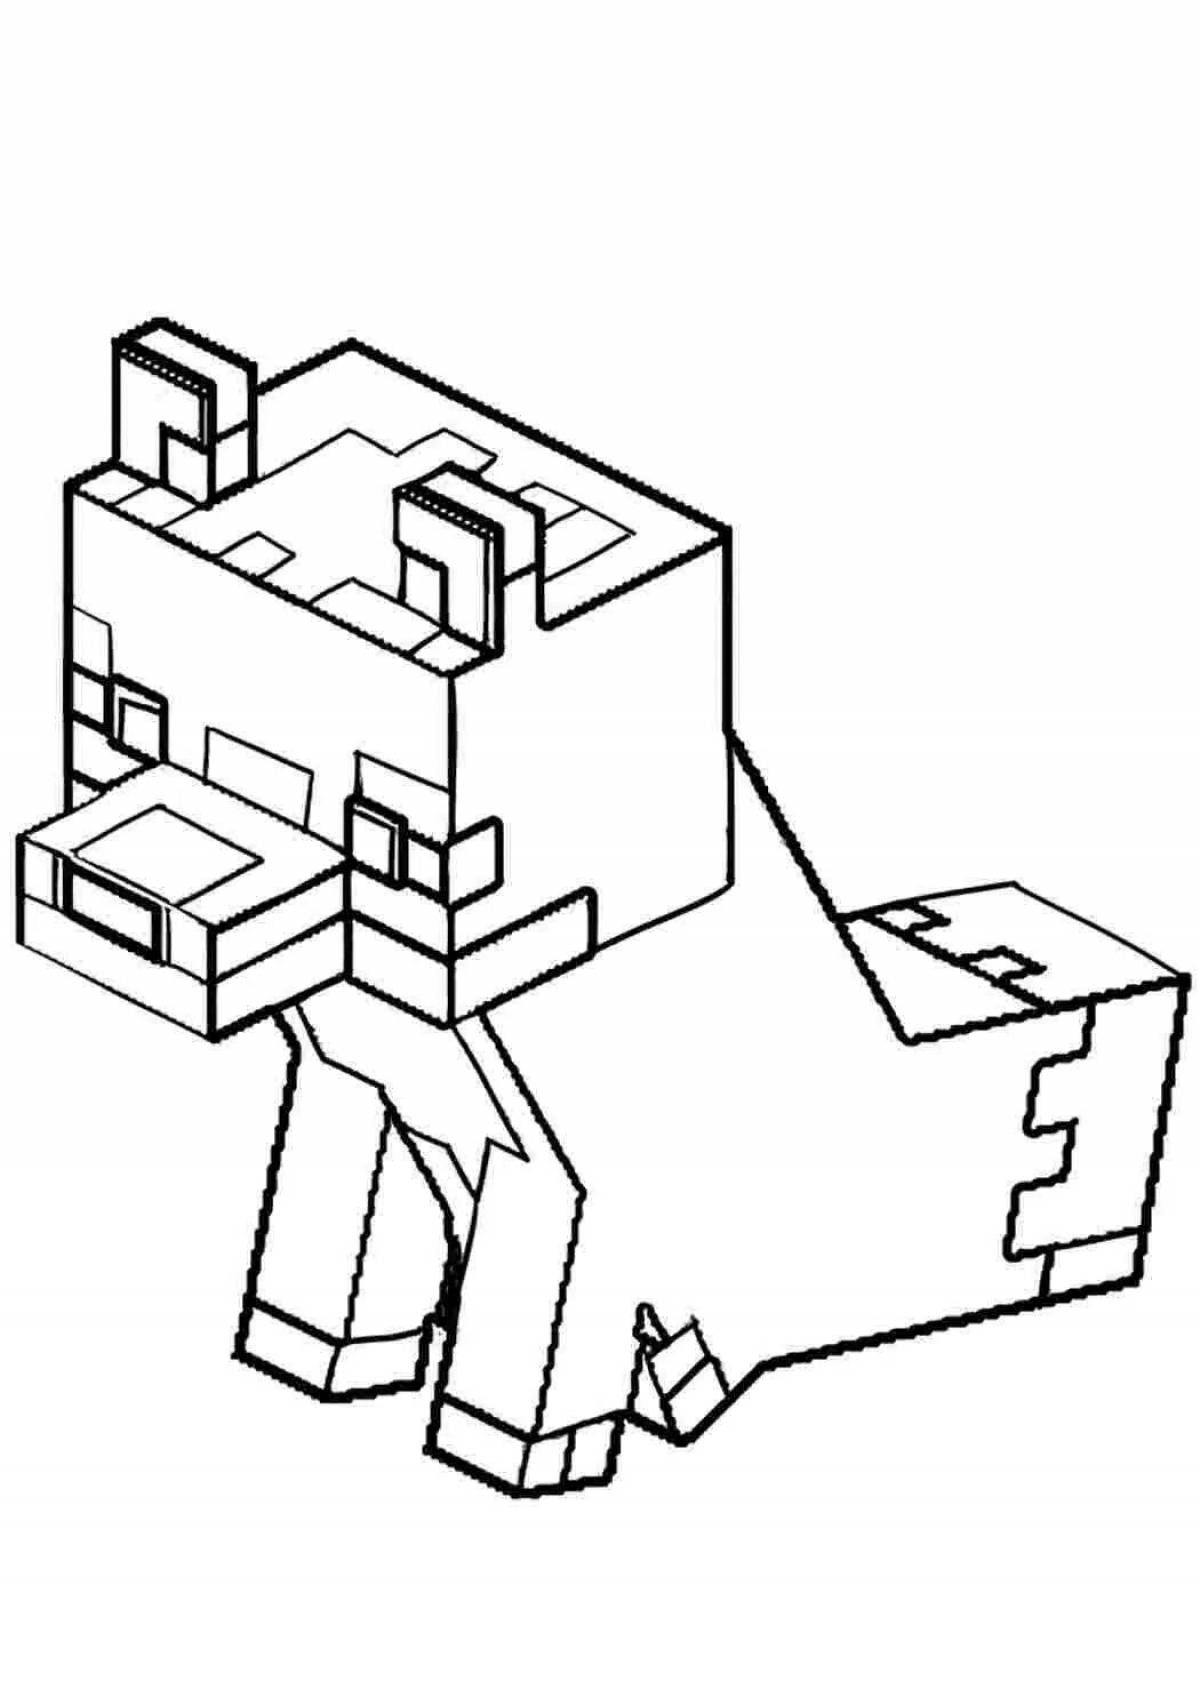 Funny minecraft bunny coloring page